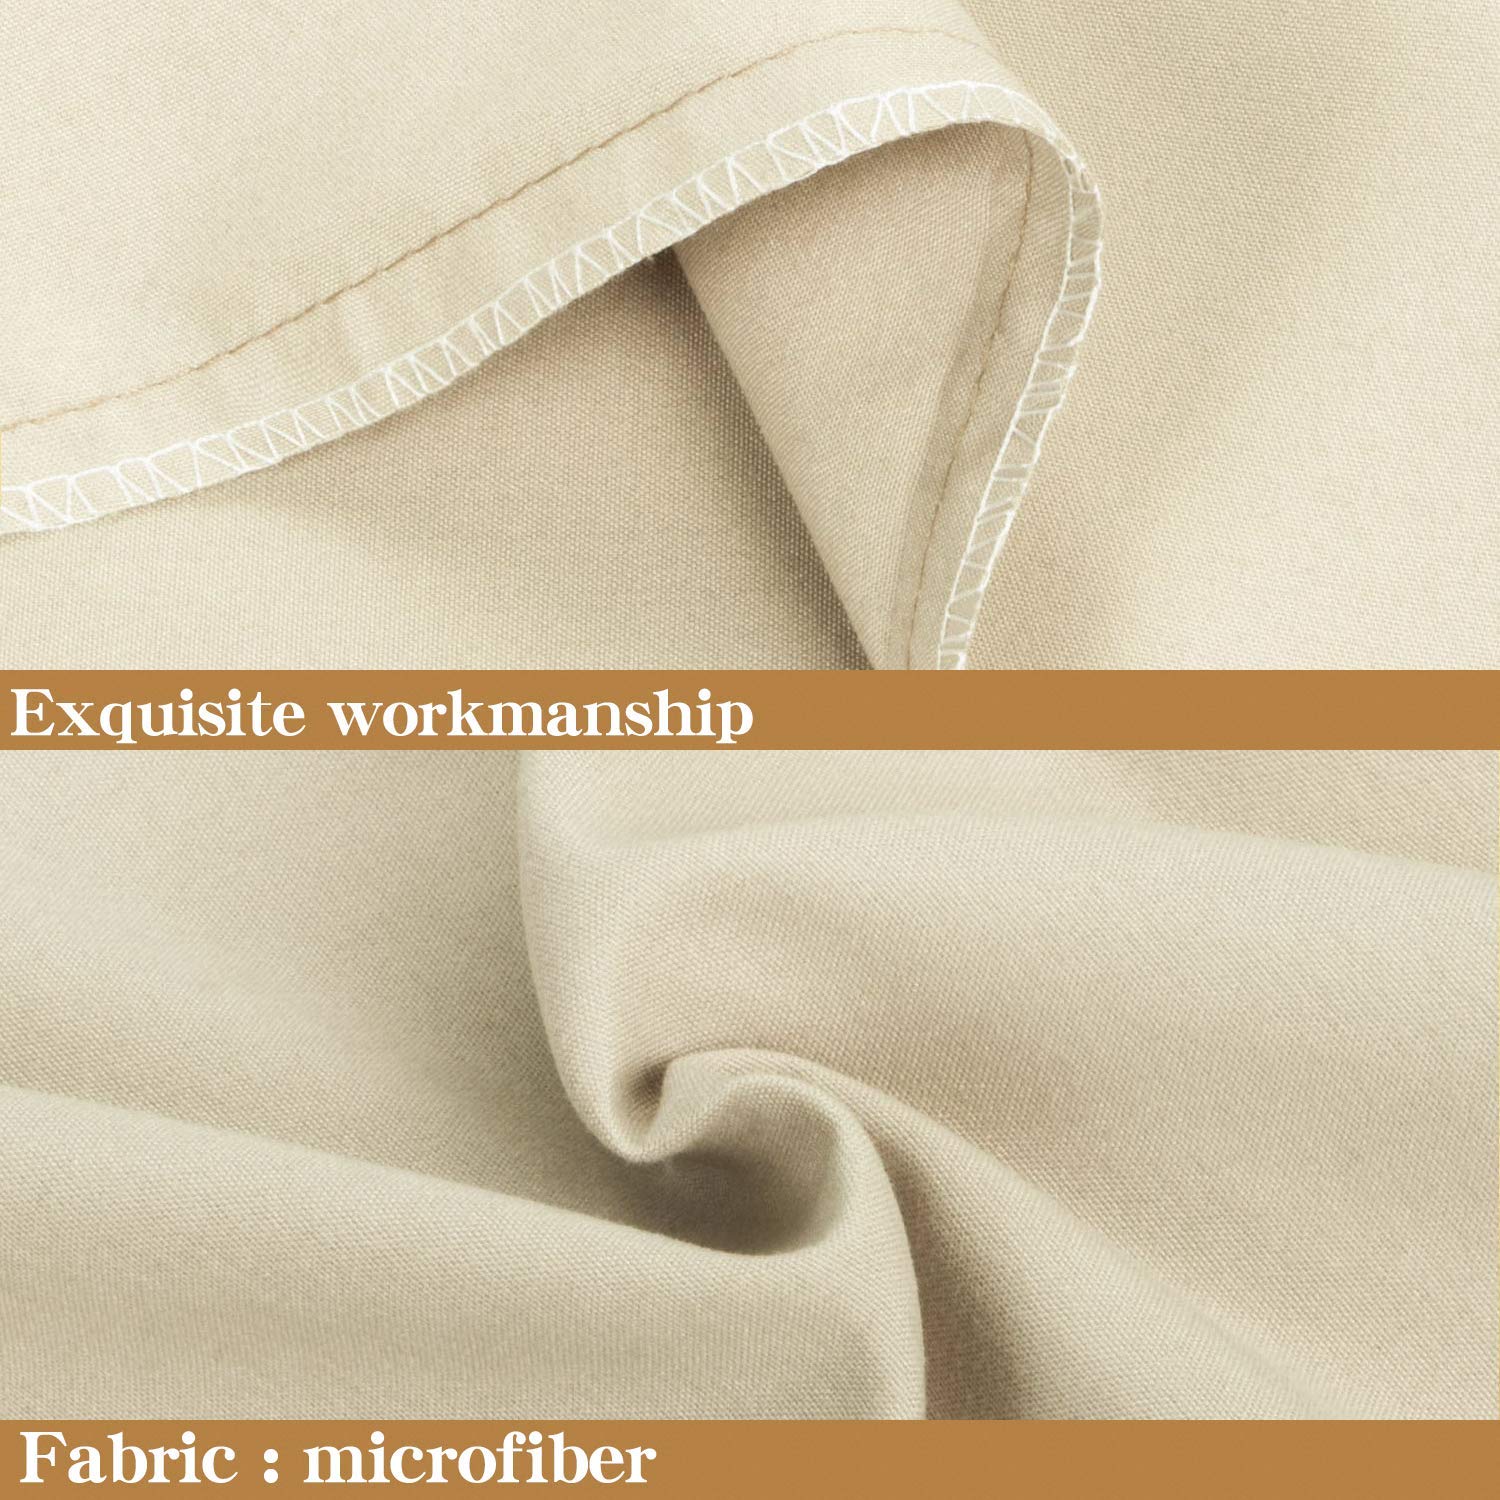 NTBAY Standard Pillowcase Set - 2 Pack Brushed Microfiber 20x26 Pillowcases - Soft, Wrinkle-Free, Fade-Resistant, Stain-Resistant, Light Taupe Pillowcases with Envelope Closure - 20x26 Inches